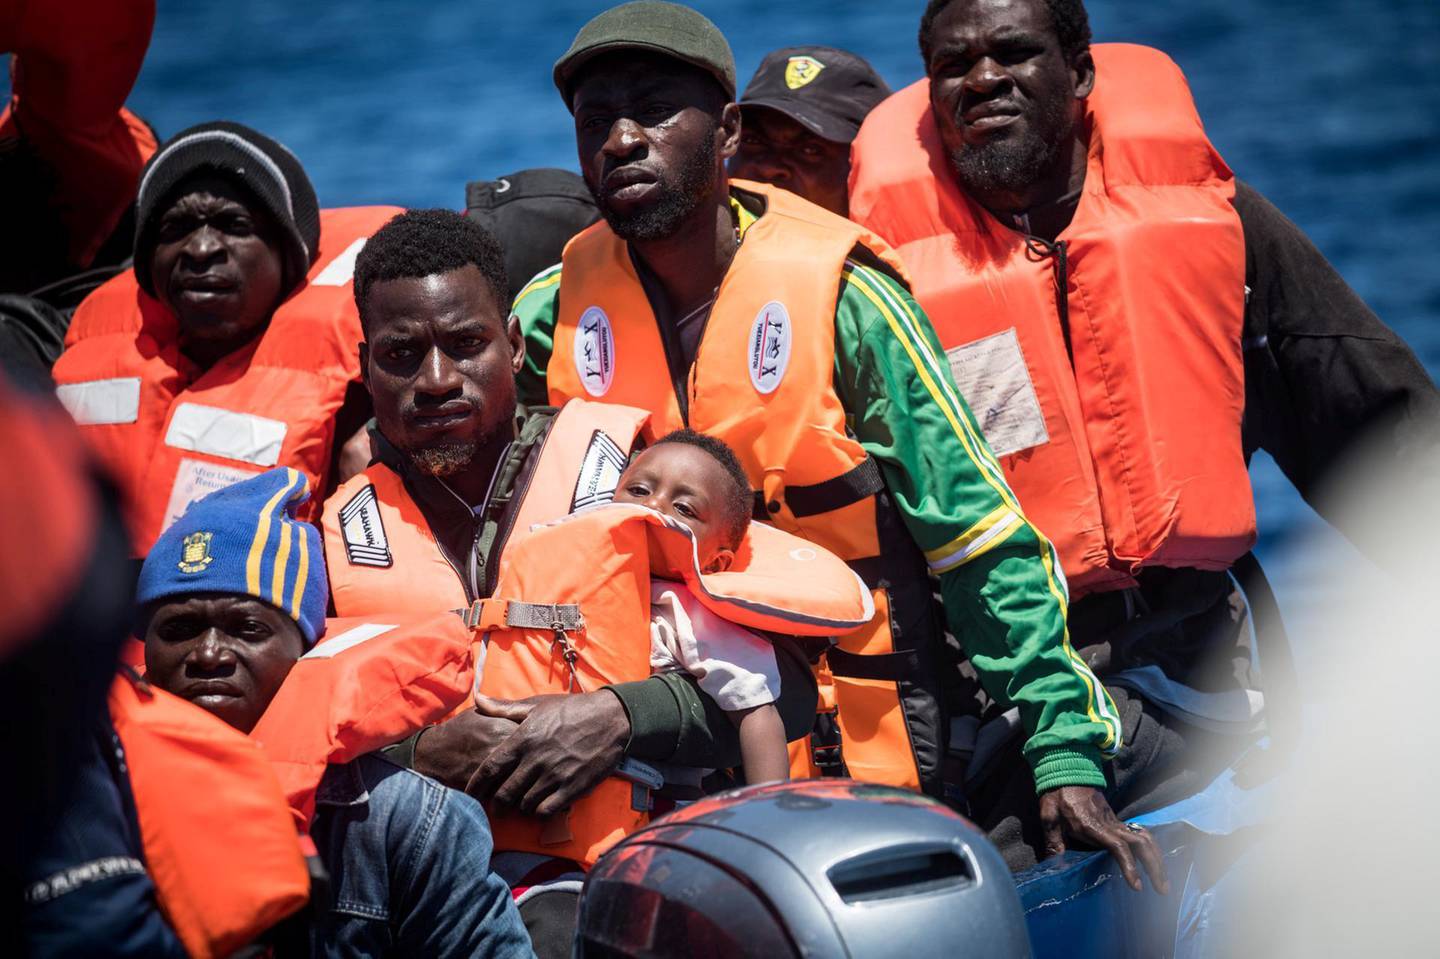 Migrants float on a dinghy before their rescue by the Sea Watch 3 German charity ship off the coast of Lampedusa, Italy May 15, 2019. Picture taken May 15, 2019. Nick Jaussi/Sea-Watch/Handout via REUTERS ATTENTION EDITORS - THIS IMAGE WAS PROVIDED BY A THIRD PARTY. NO RESALES. NO ARCHIVES. MANDATORY CREDIT